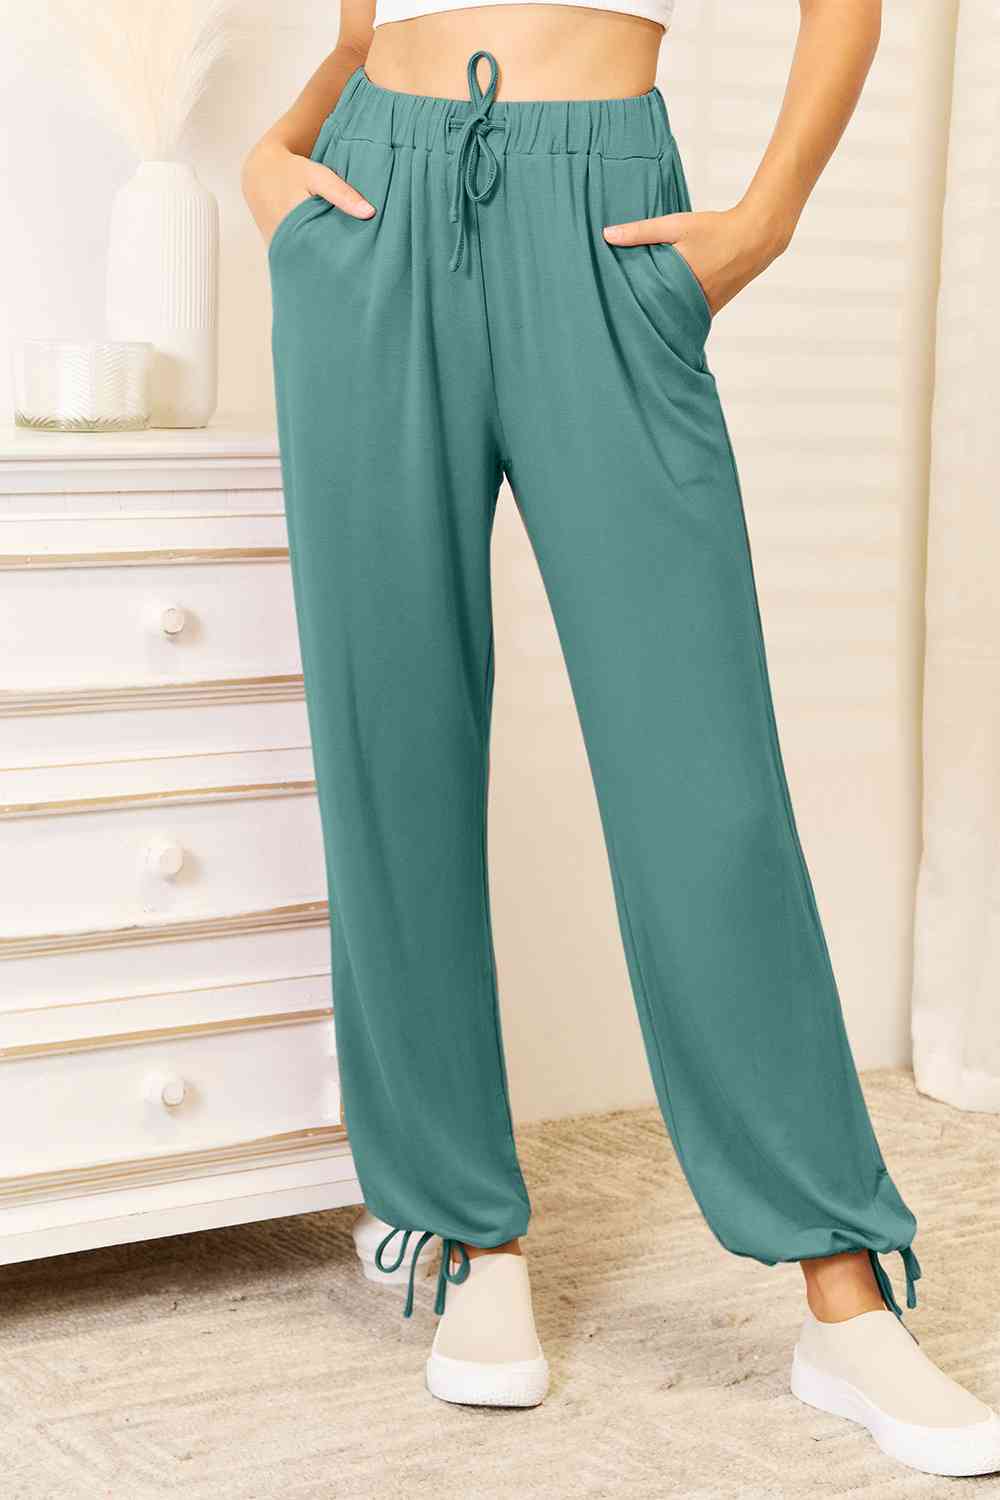 Basic Bae Full Size Soft Rayon Drawstring Pants with Pockets (3 Colors) pant Krazy Heart Designs Boutique Teal S 